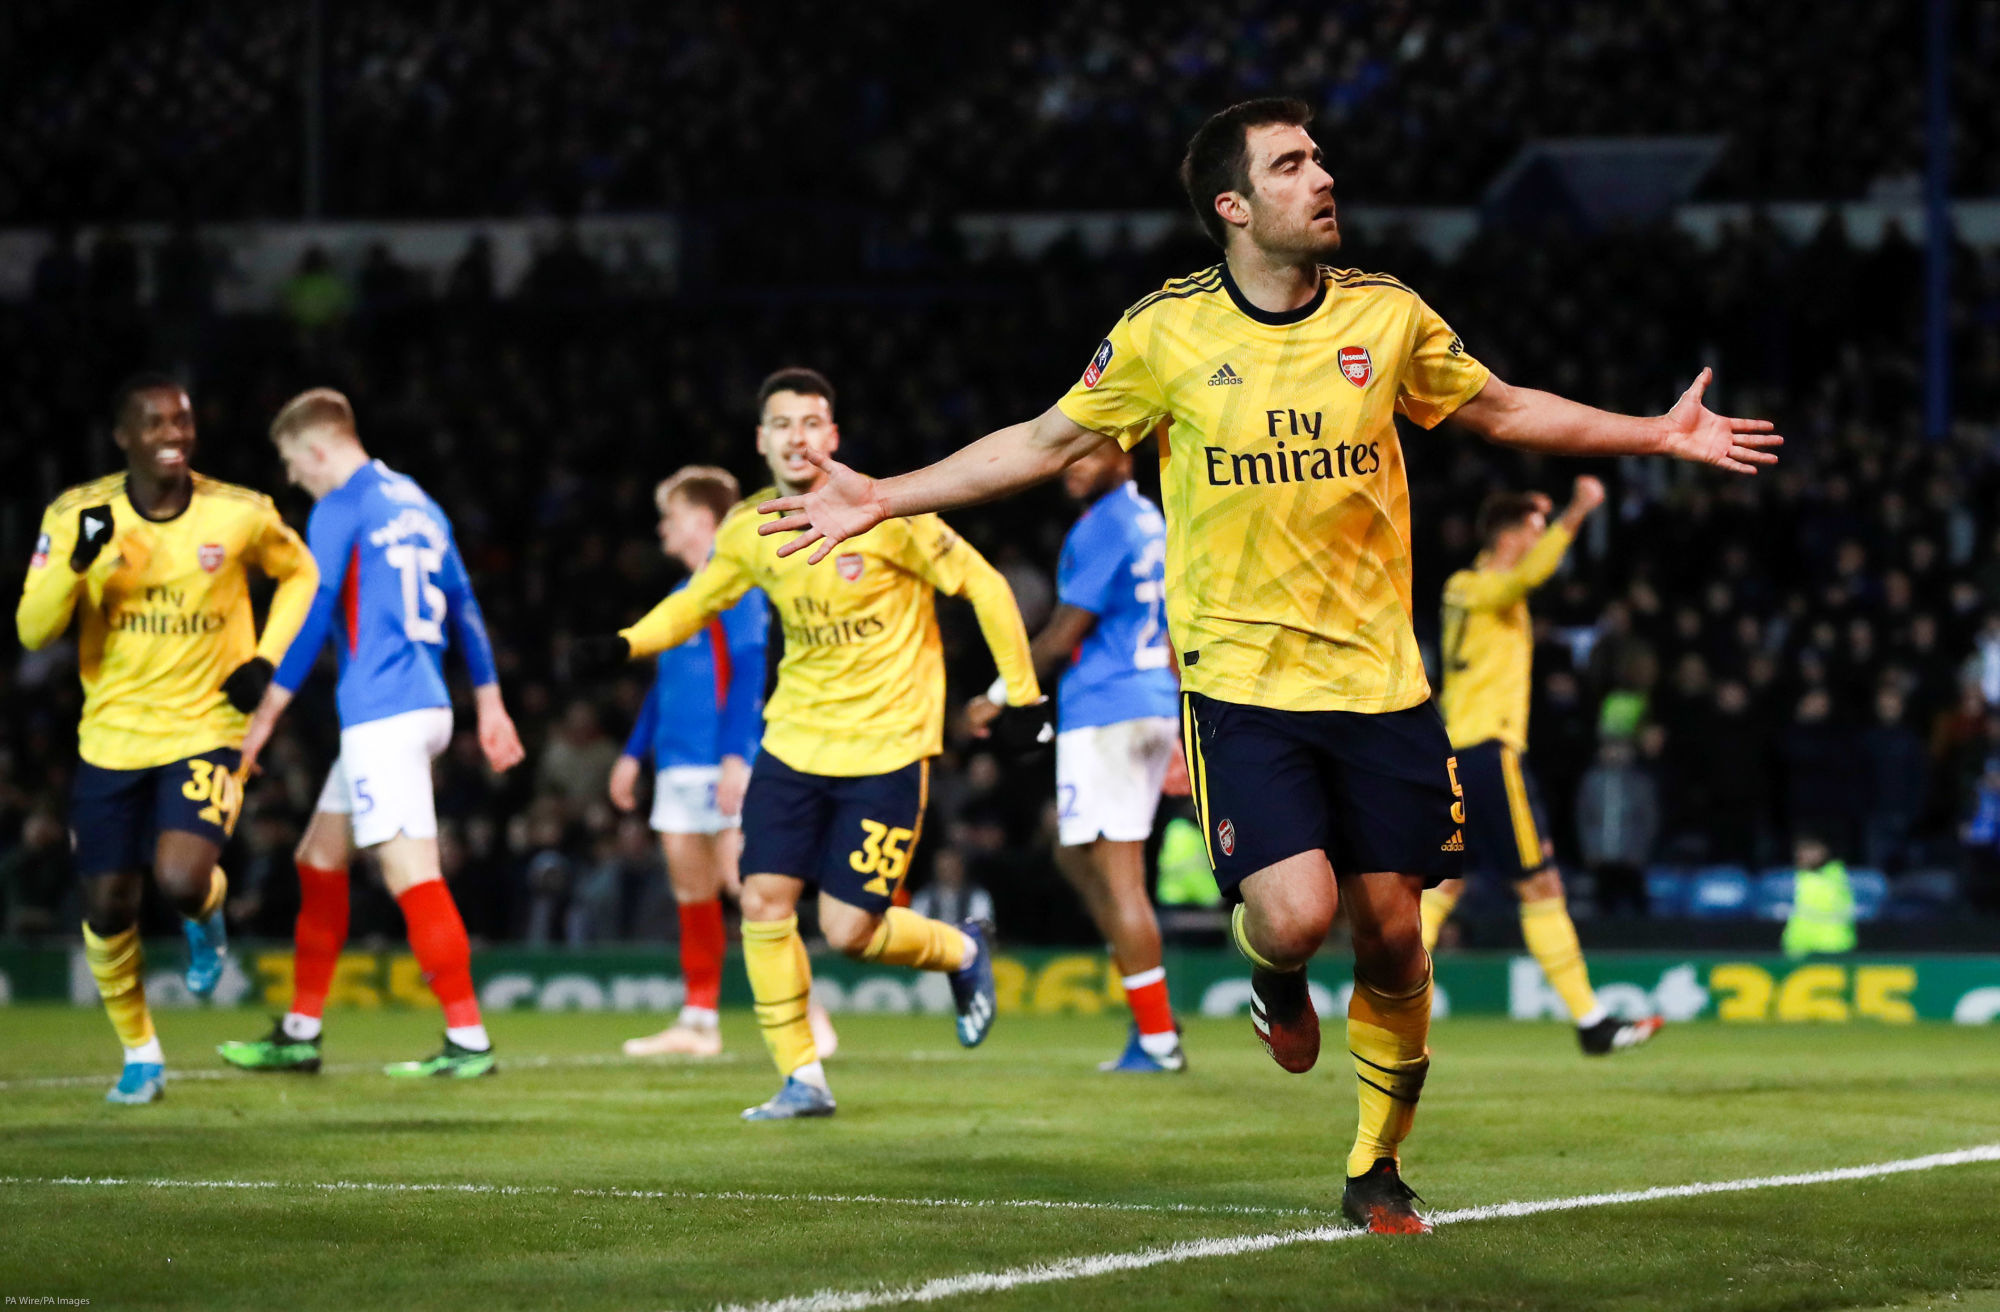 Arsenal's Sokratis Papastathopoulos celebrates scoring his side's first goal of the game during the FA Cup fifth round match at Fratton Park, Portsmouth. 

Photo by Icon Sport